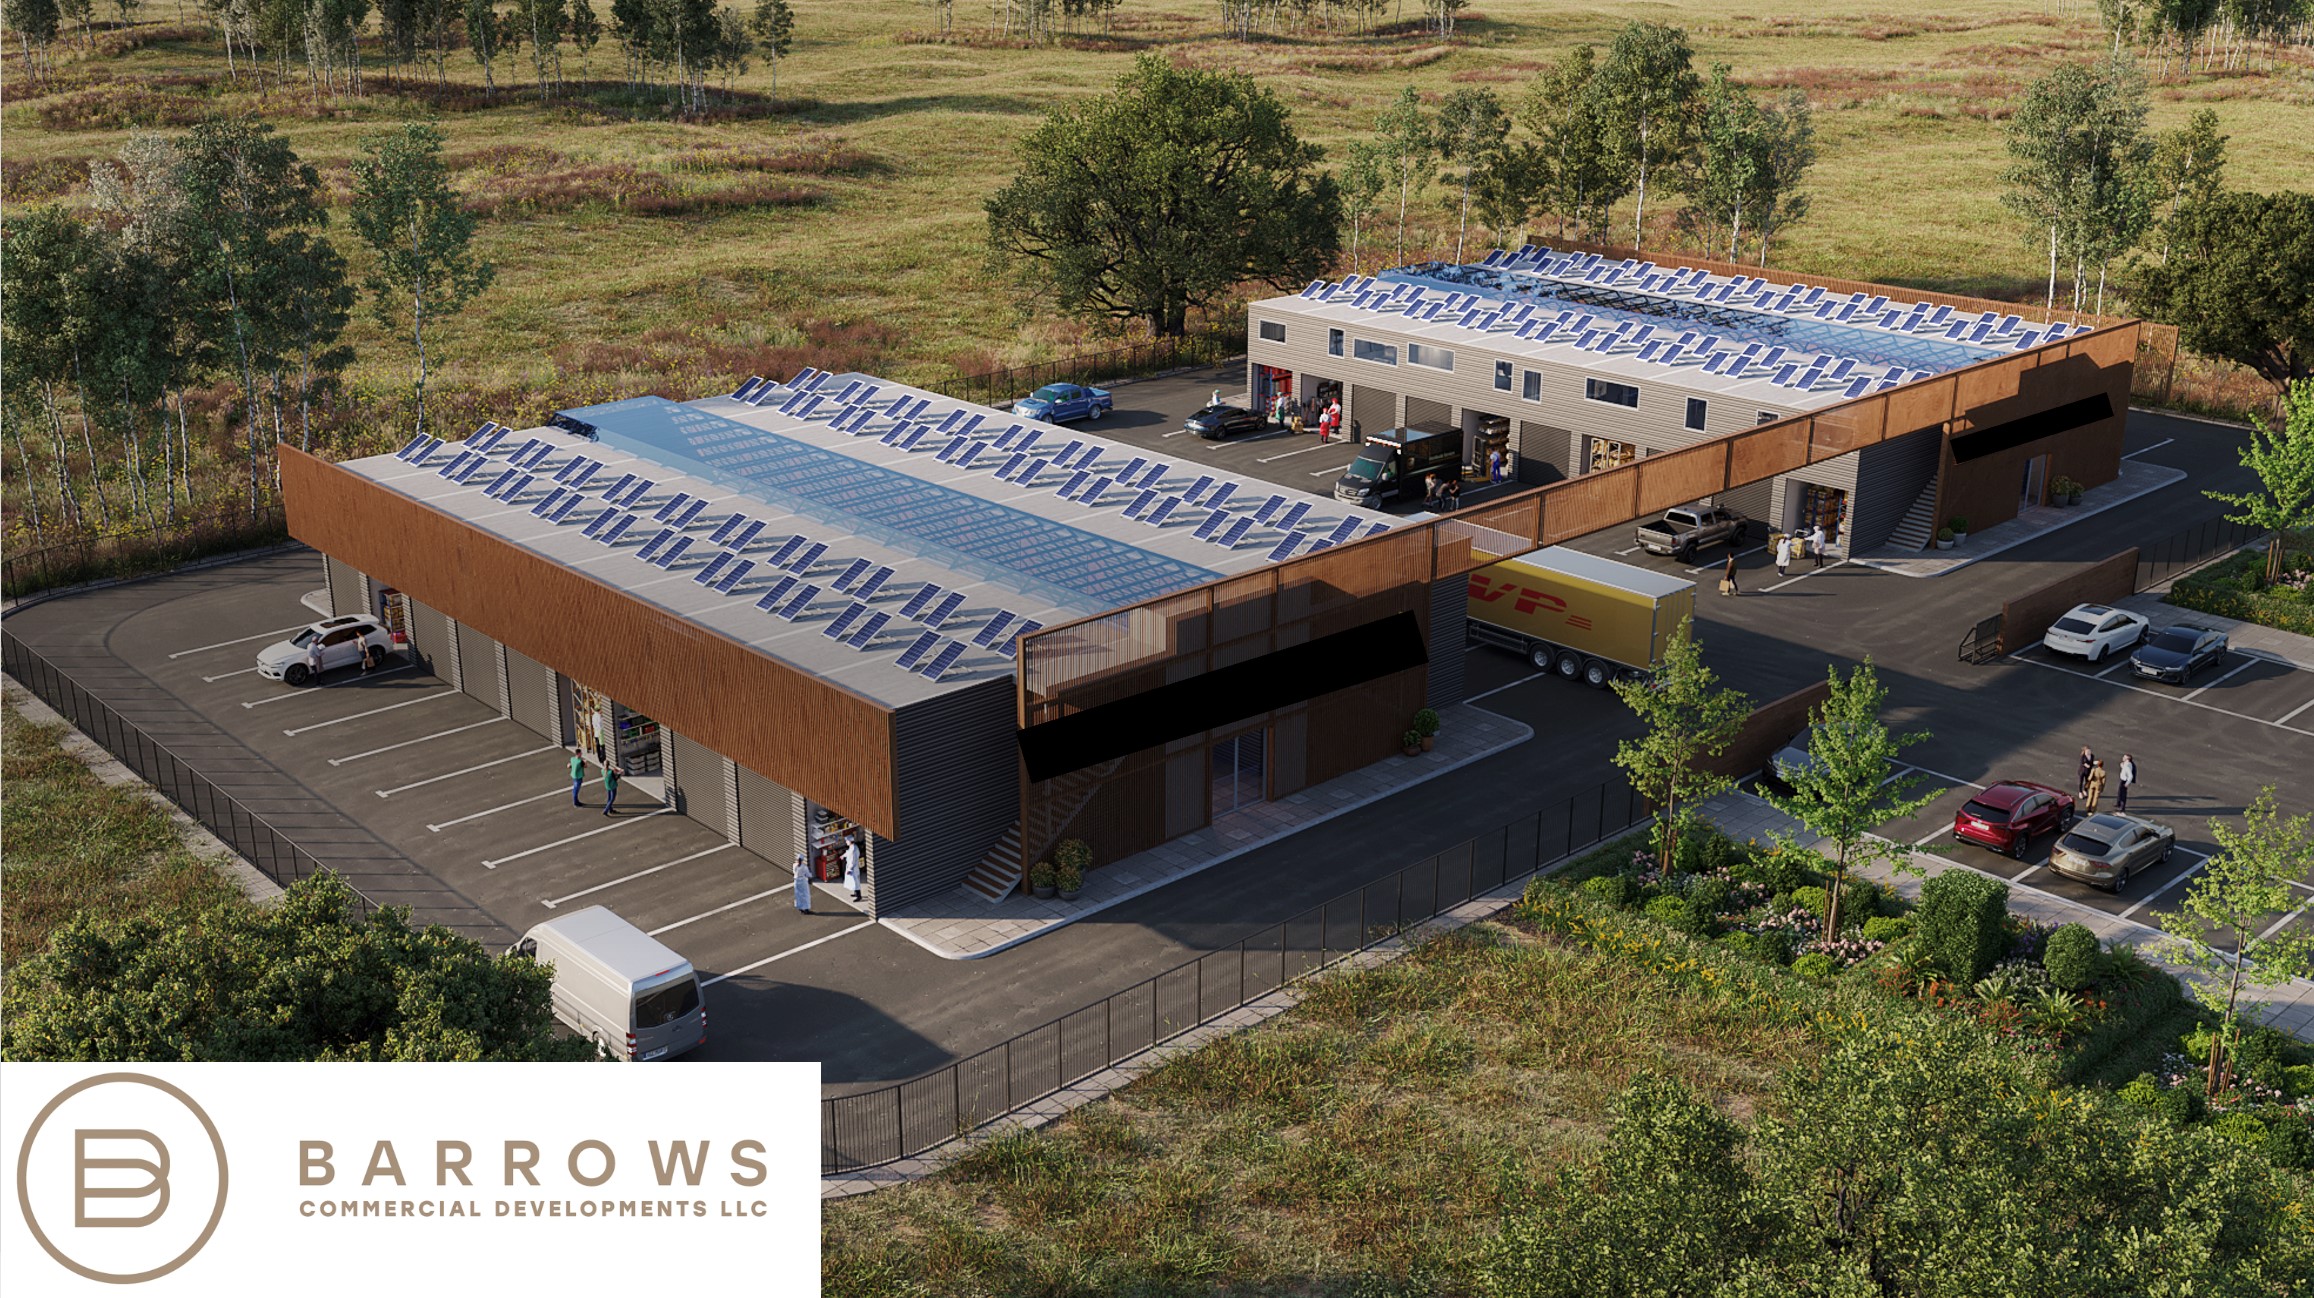 Barrows Develops New Commercial Business Parks for Small and Medium-sized Enterprises (SMEs) in Mauritius